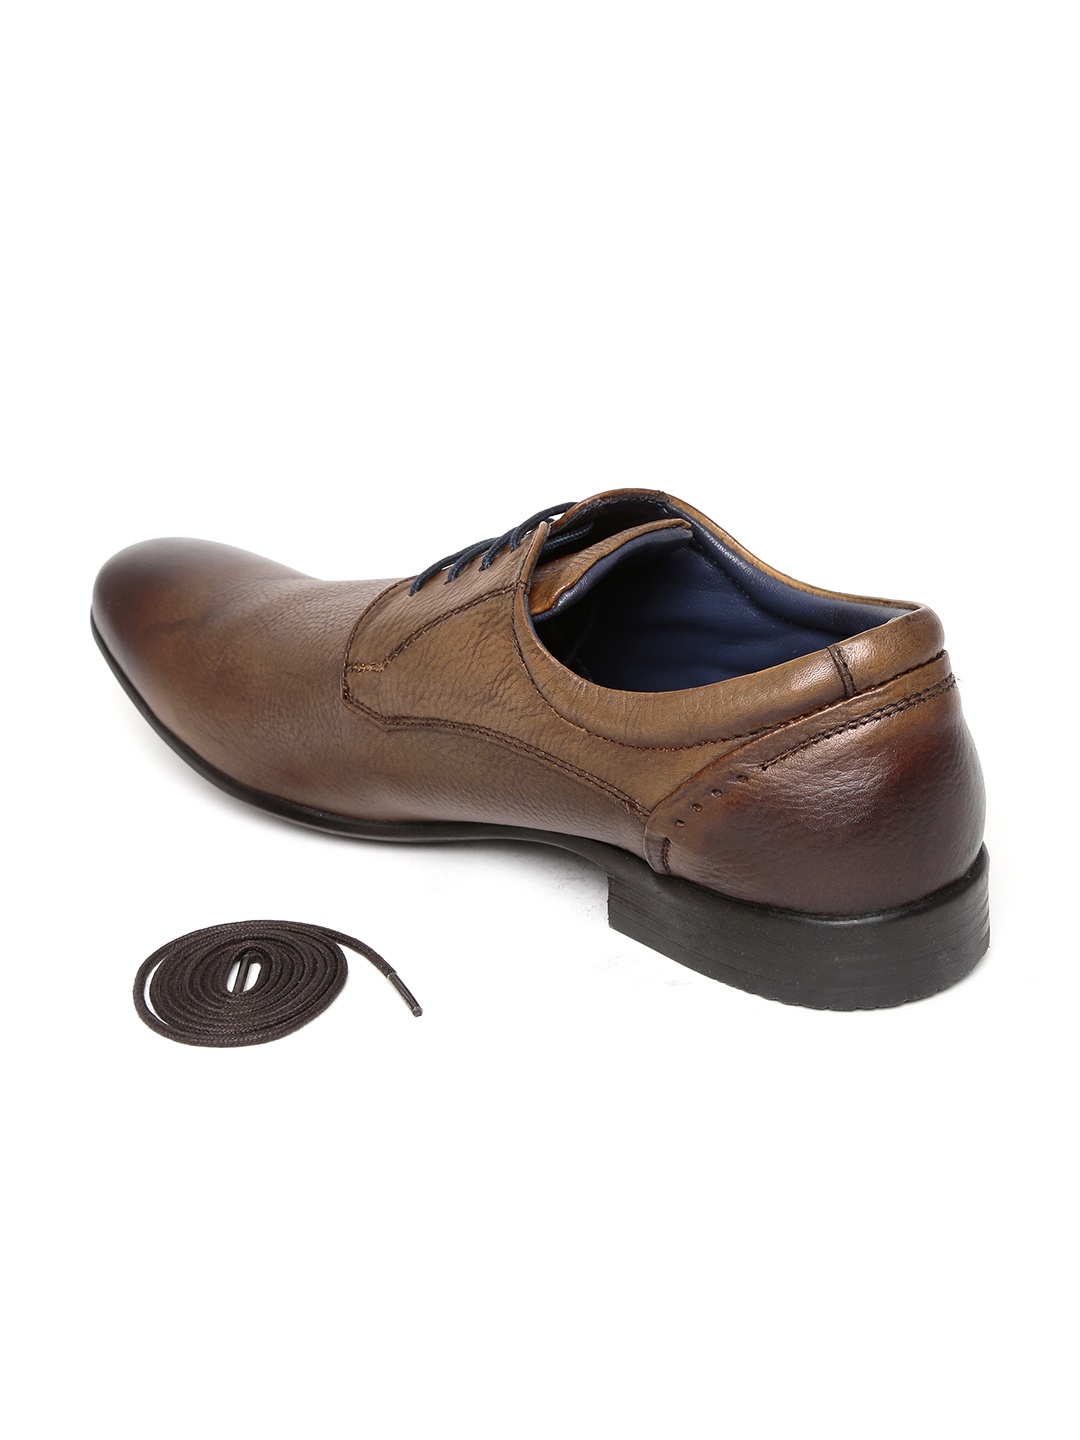 ... Formal Shoes by Hush Puppies More Brown Formal Shoes More Formal Shoes